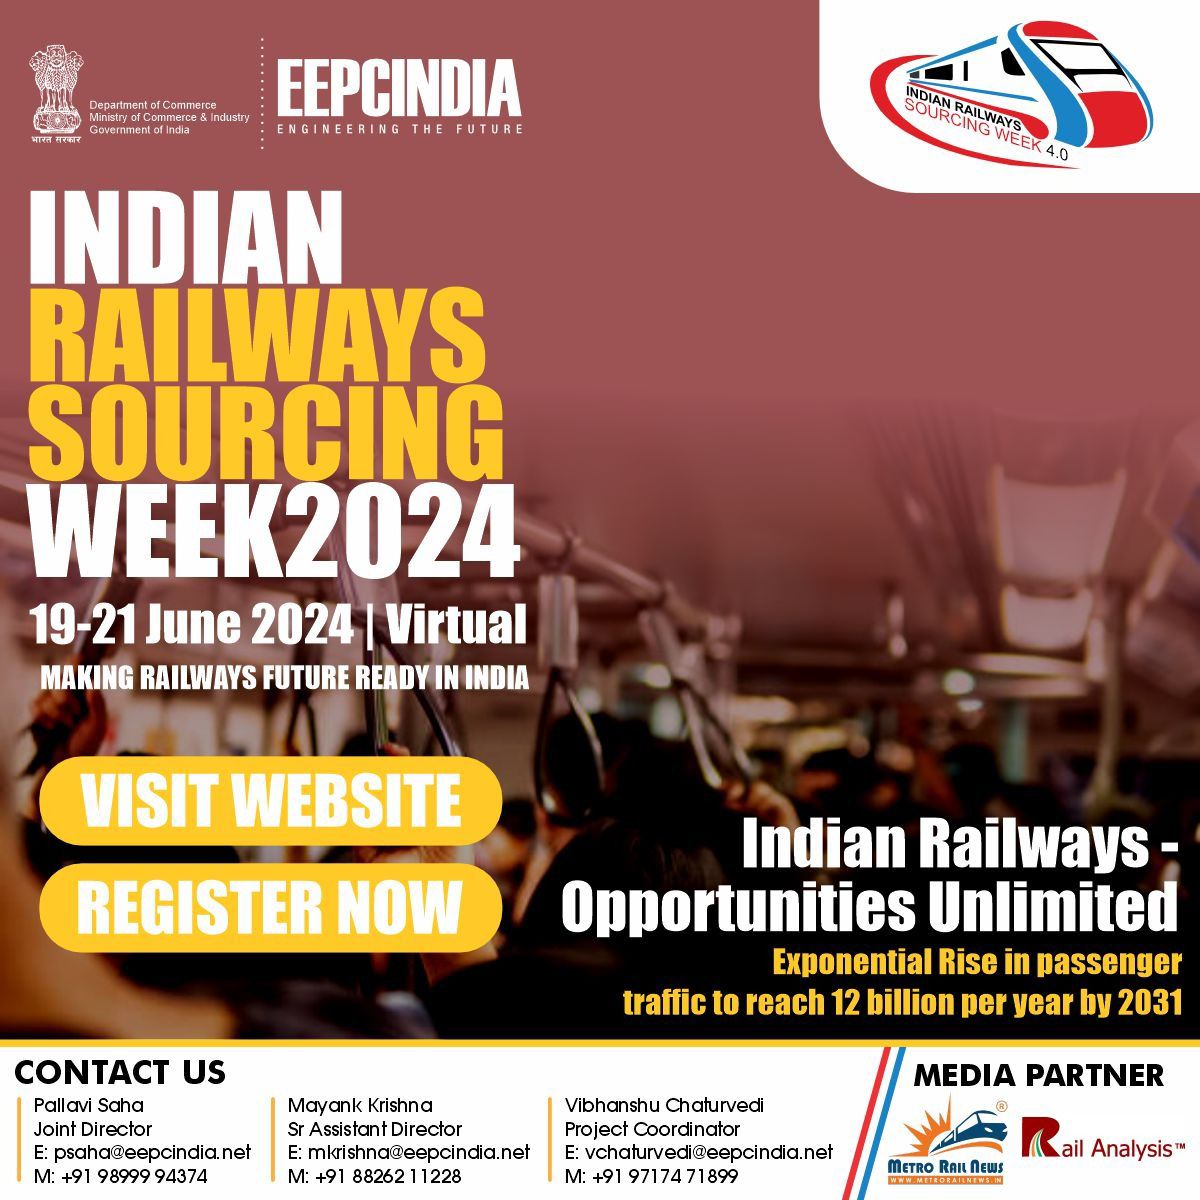 Indian Railways currently ferrying 22.3 million passengers is expected to experience a exponential rise in the traffic, opening vistas of opportunities for investors and suppliers Find out more @ #IRSW4.0 👉Register eepcvirtualexpo.com/conference_man… 👉Navigate eepcvirtualexpo.com/railwaysourcin…